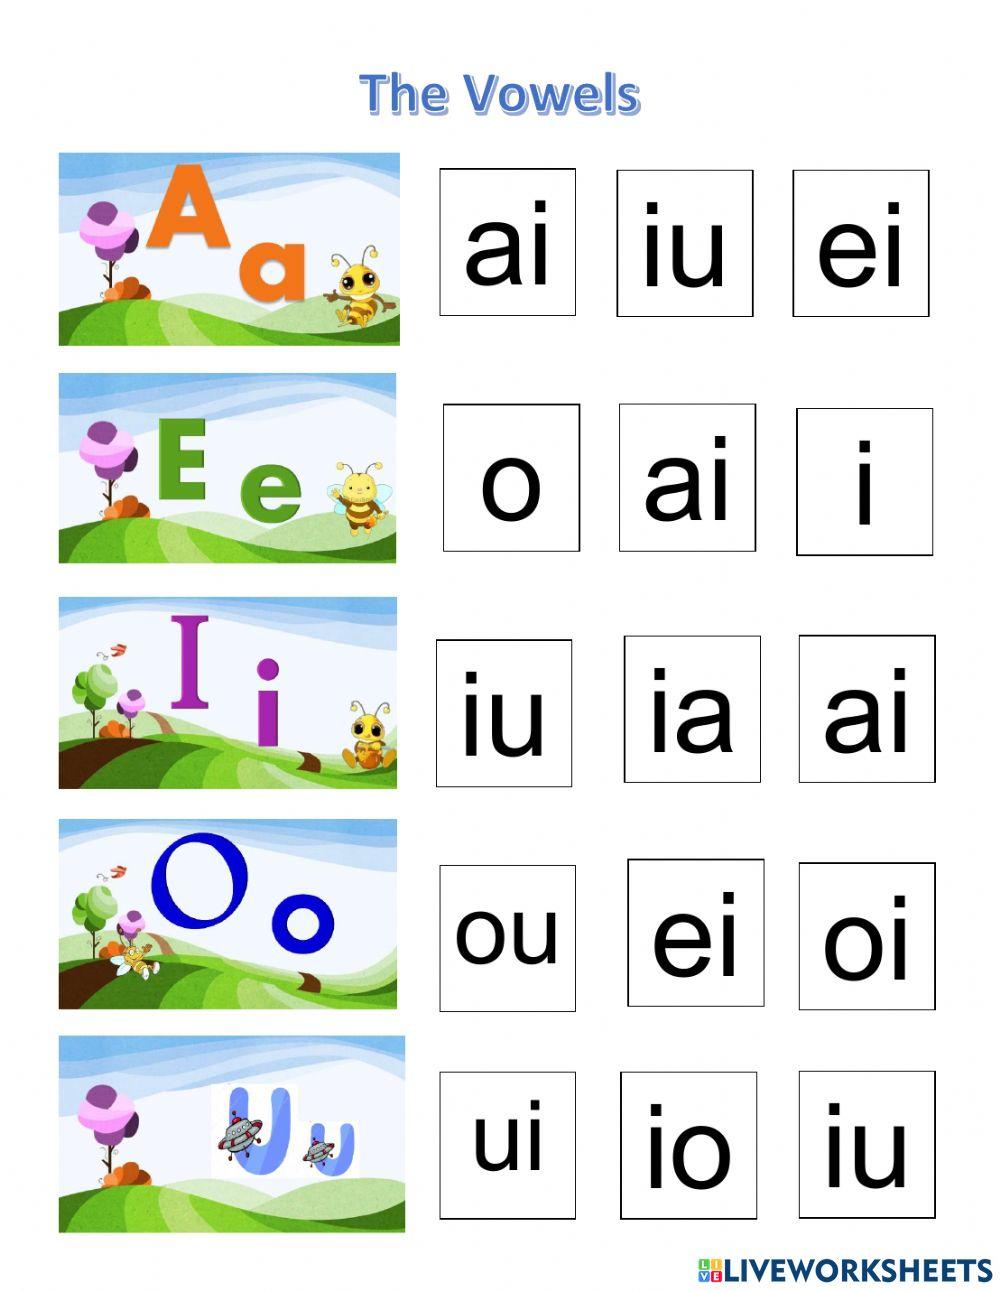 The vowels